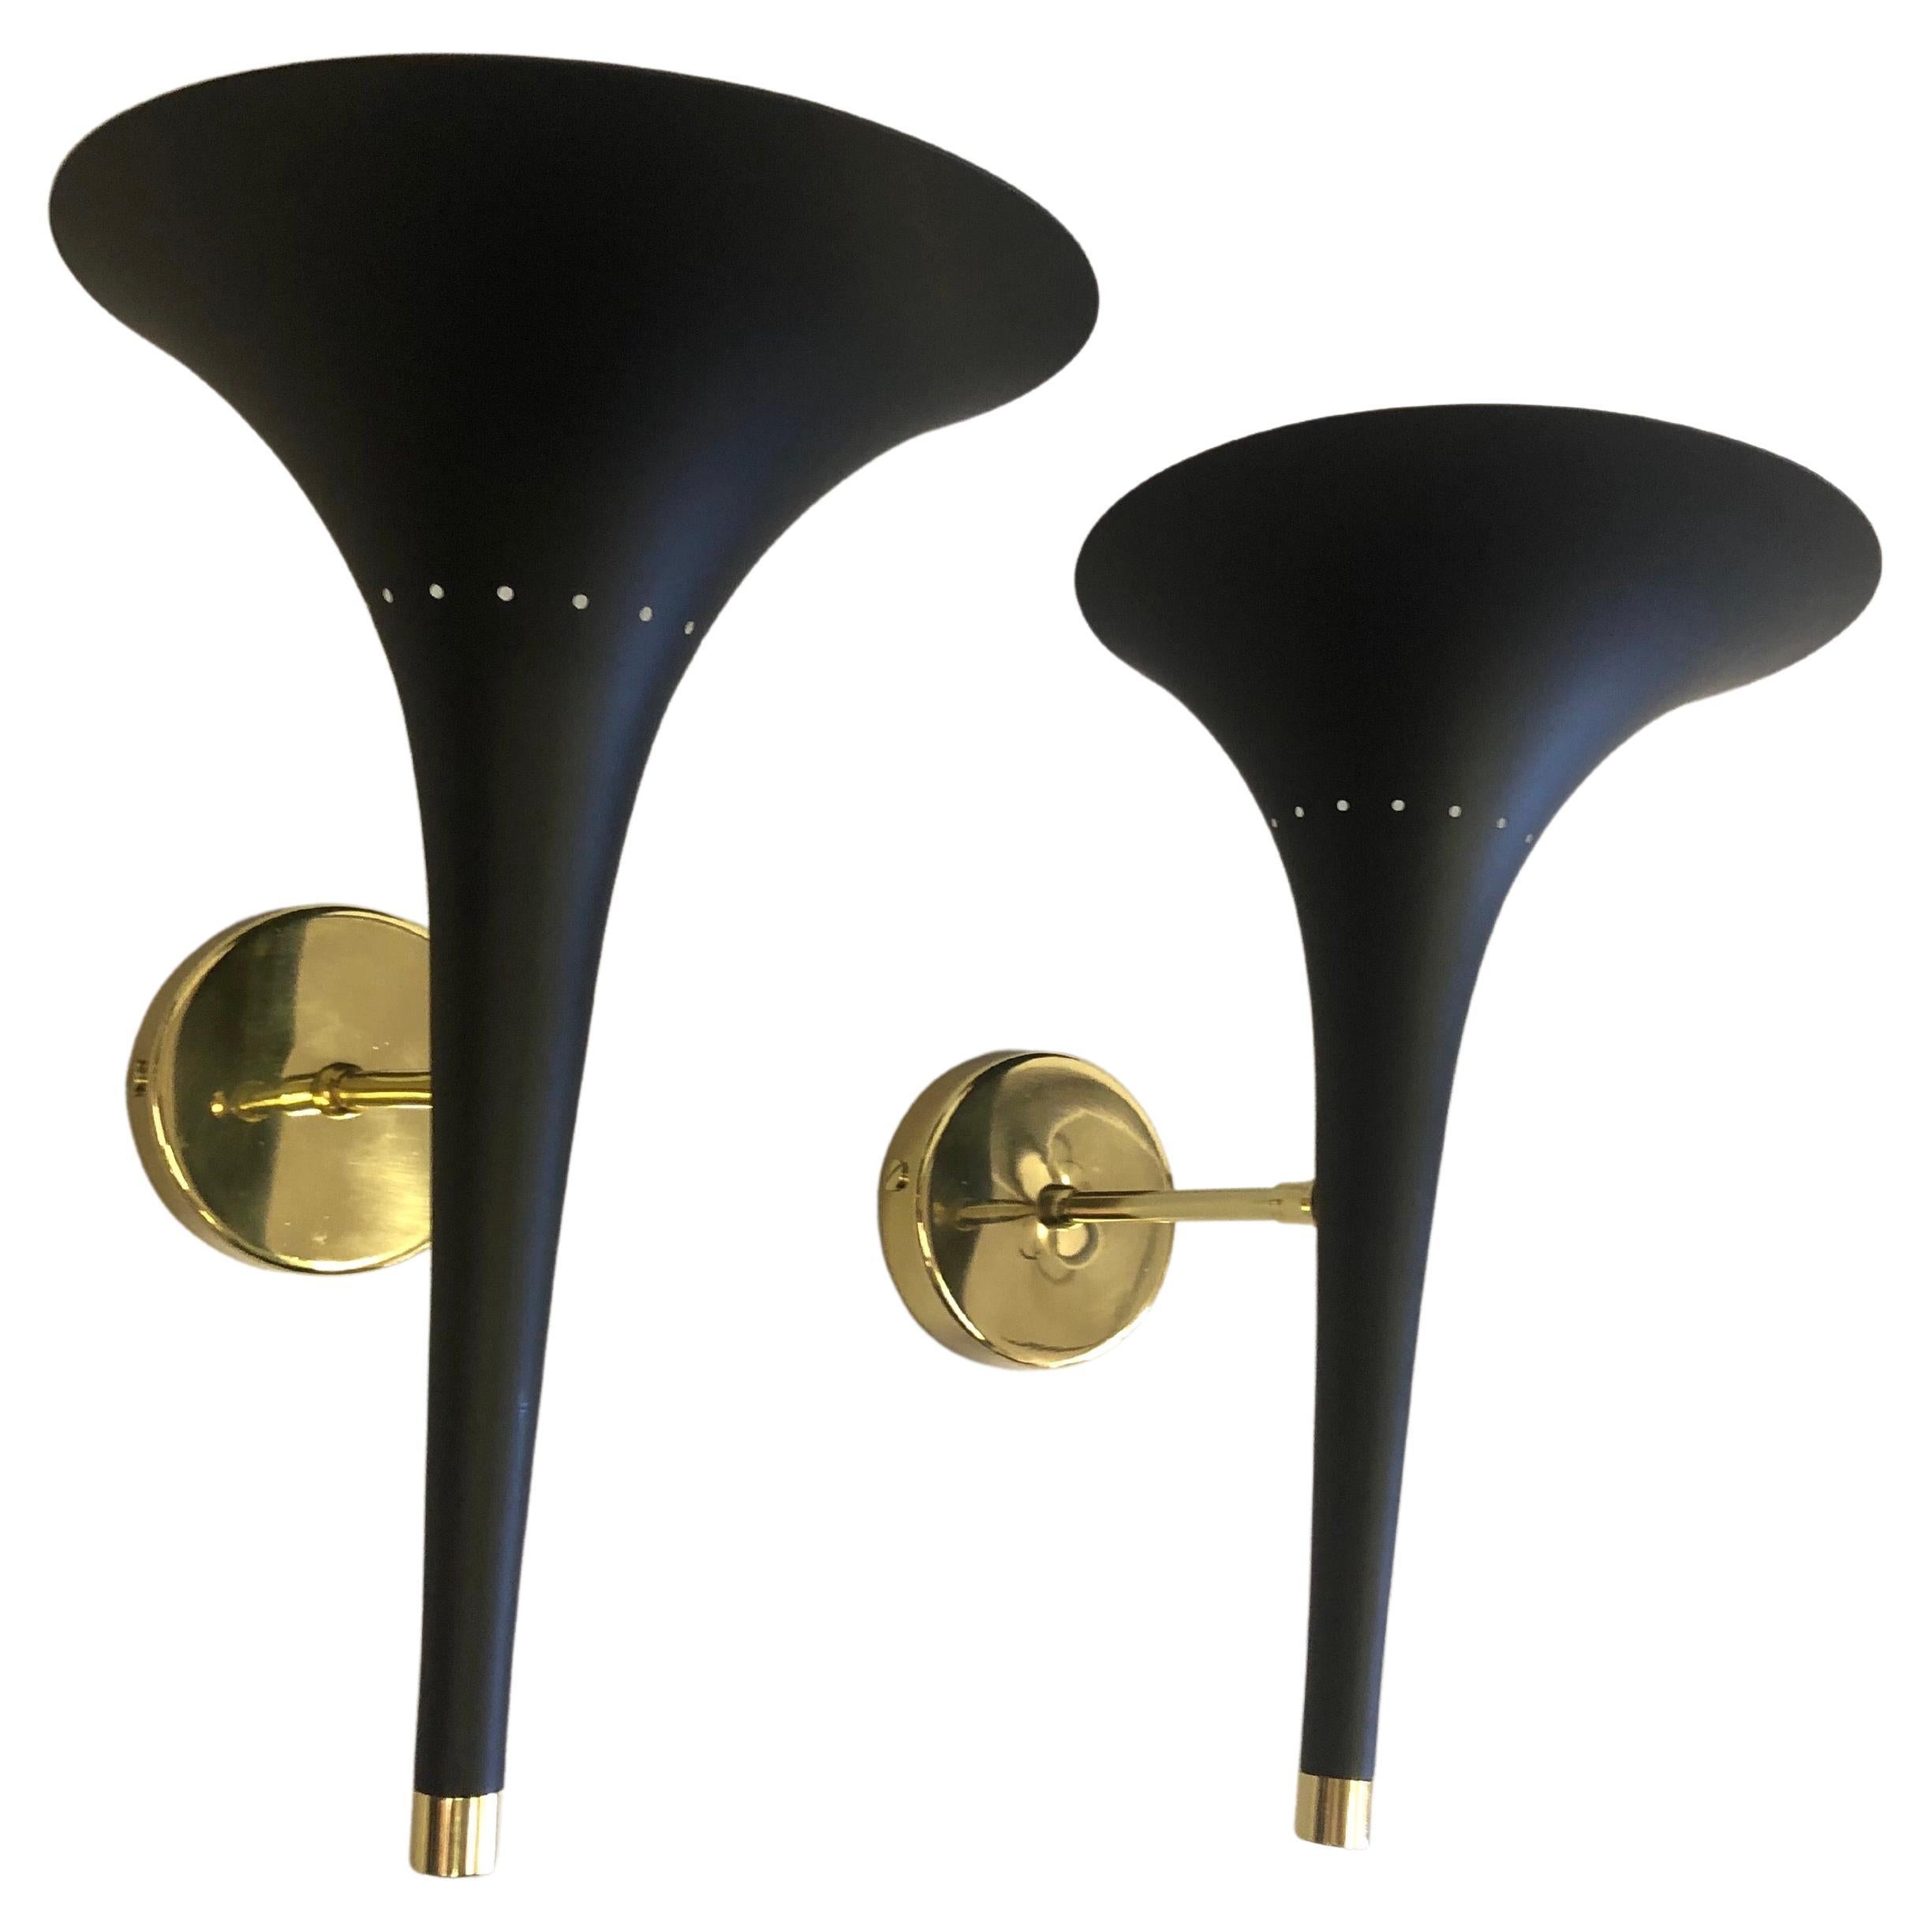 Pair of Italian Mid-Century Modern Sconces Attributed to Stilnovo For Sale